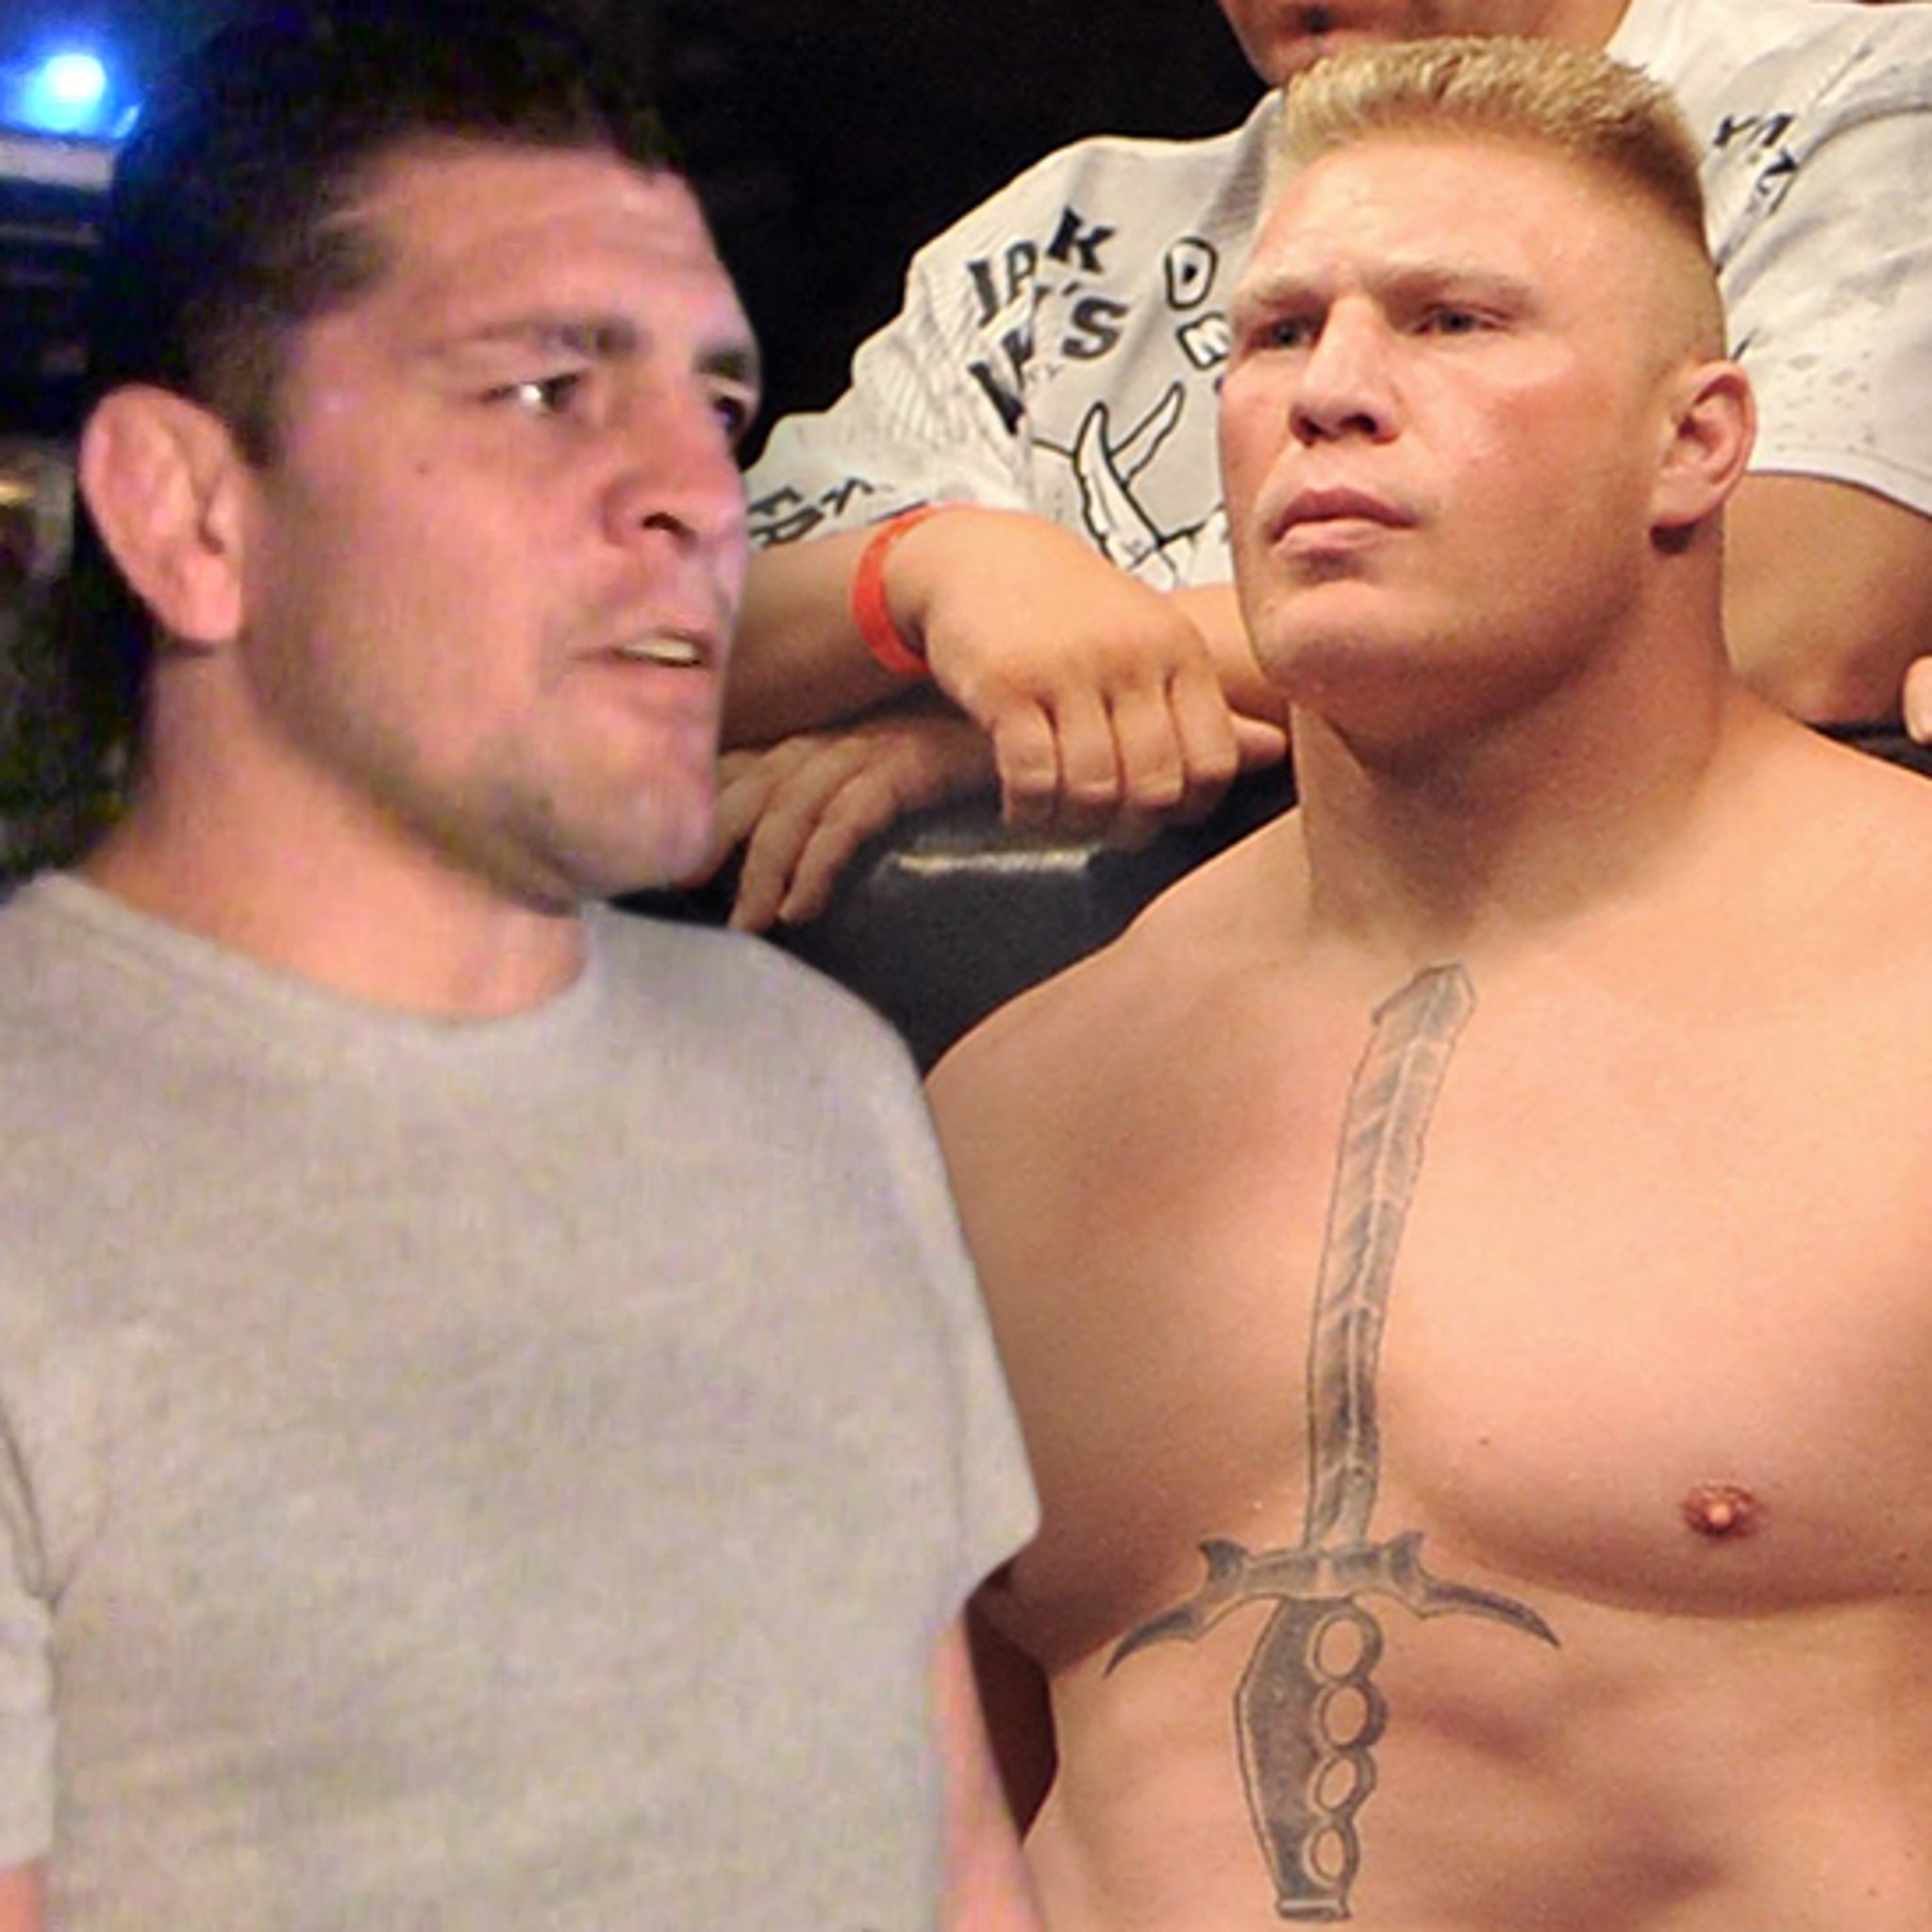 Nick Diaz Blasts 'Dick Chest' Brock Lesnar, You're a Cheater!